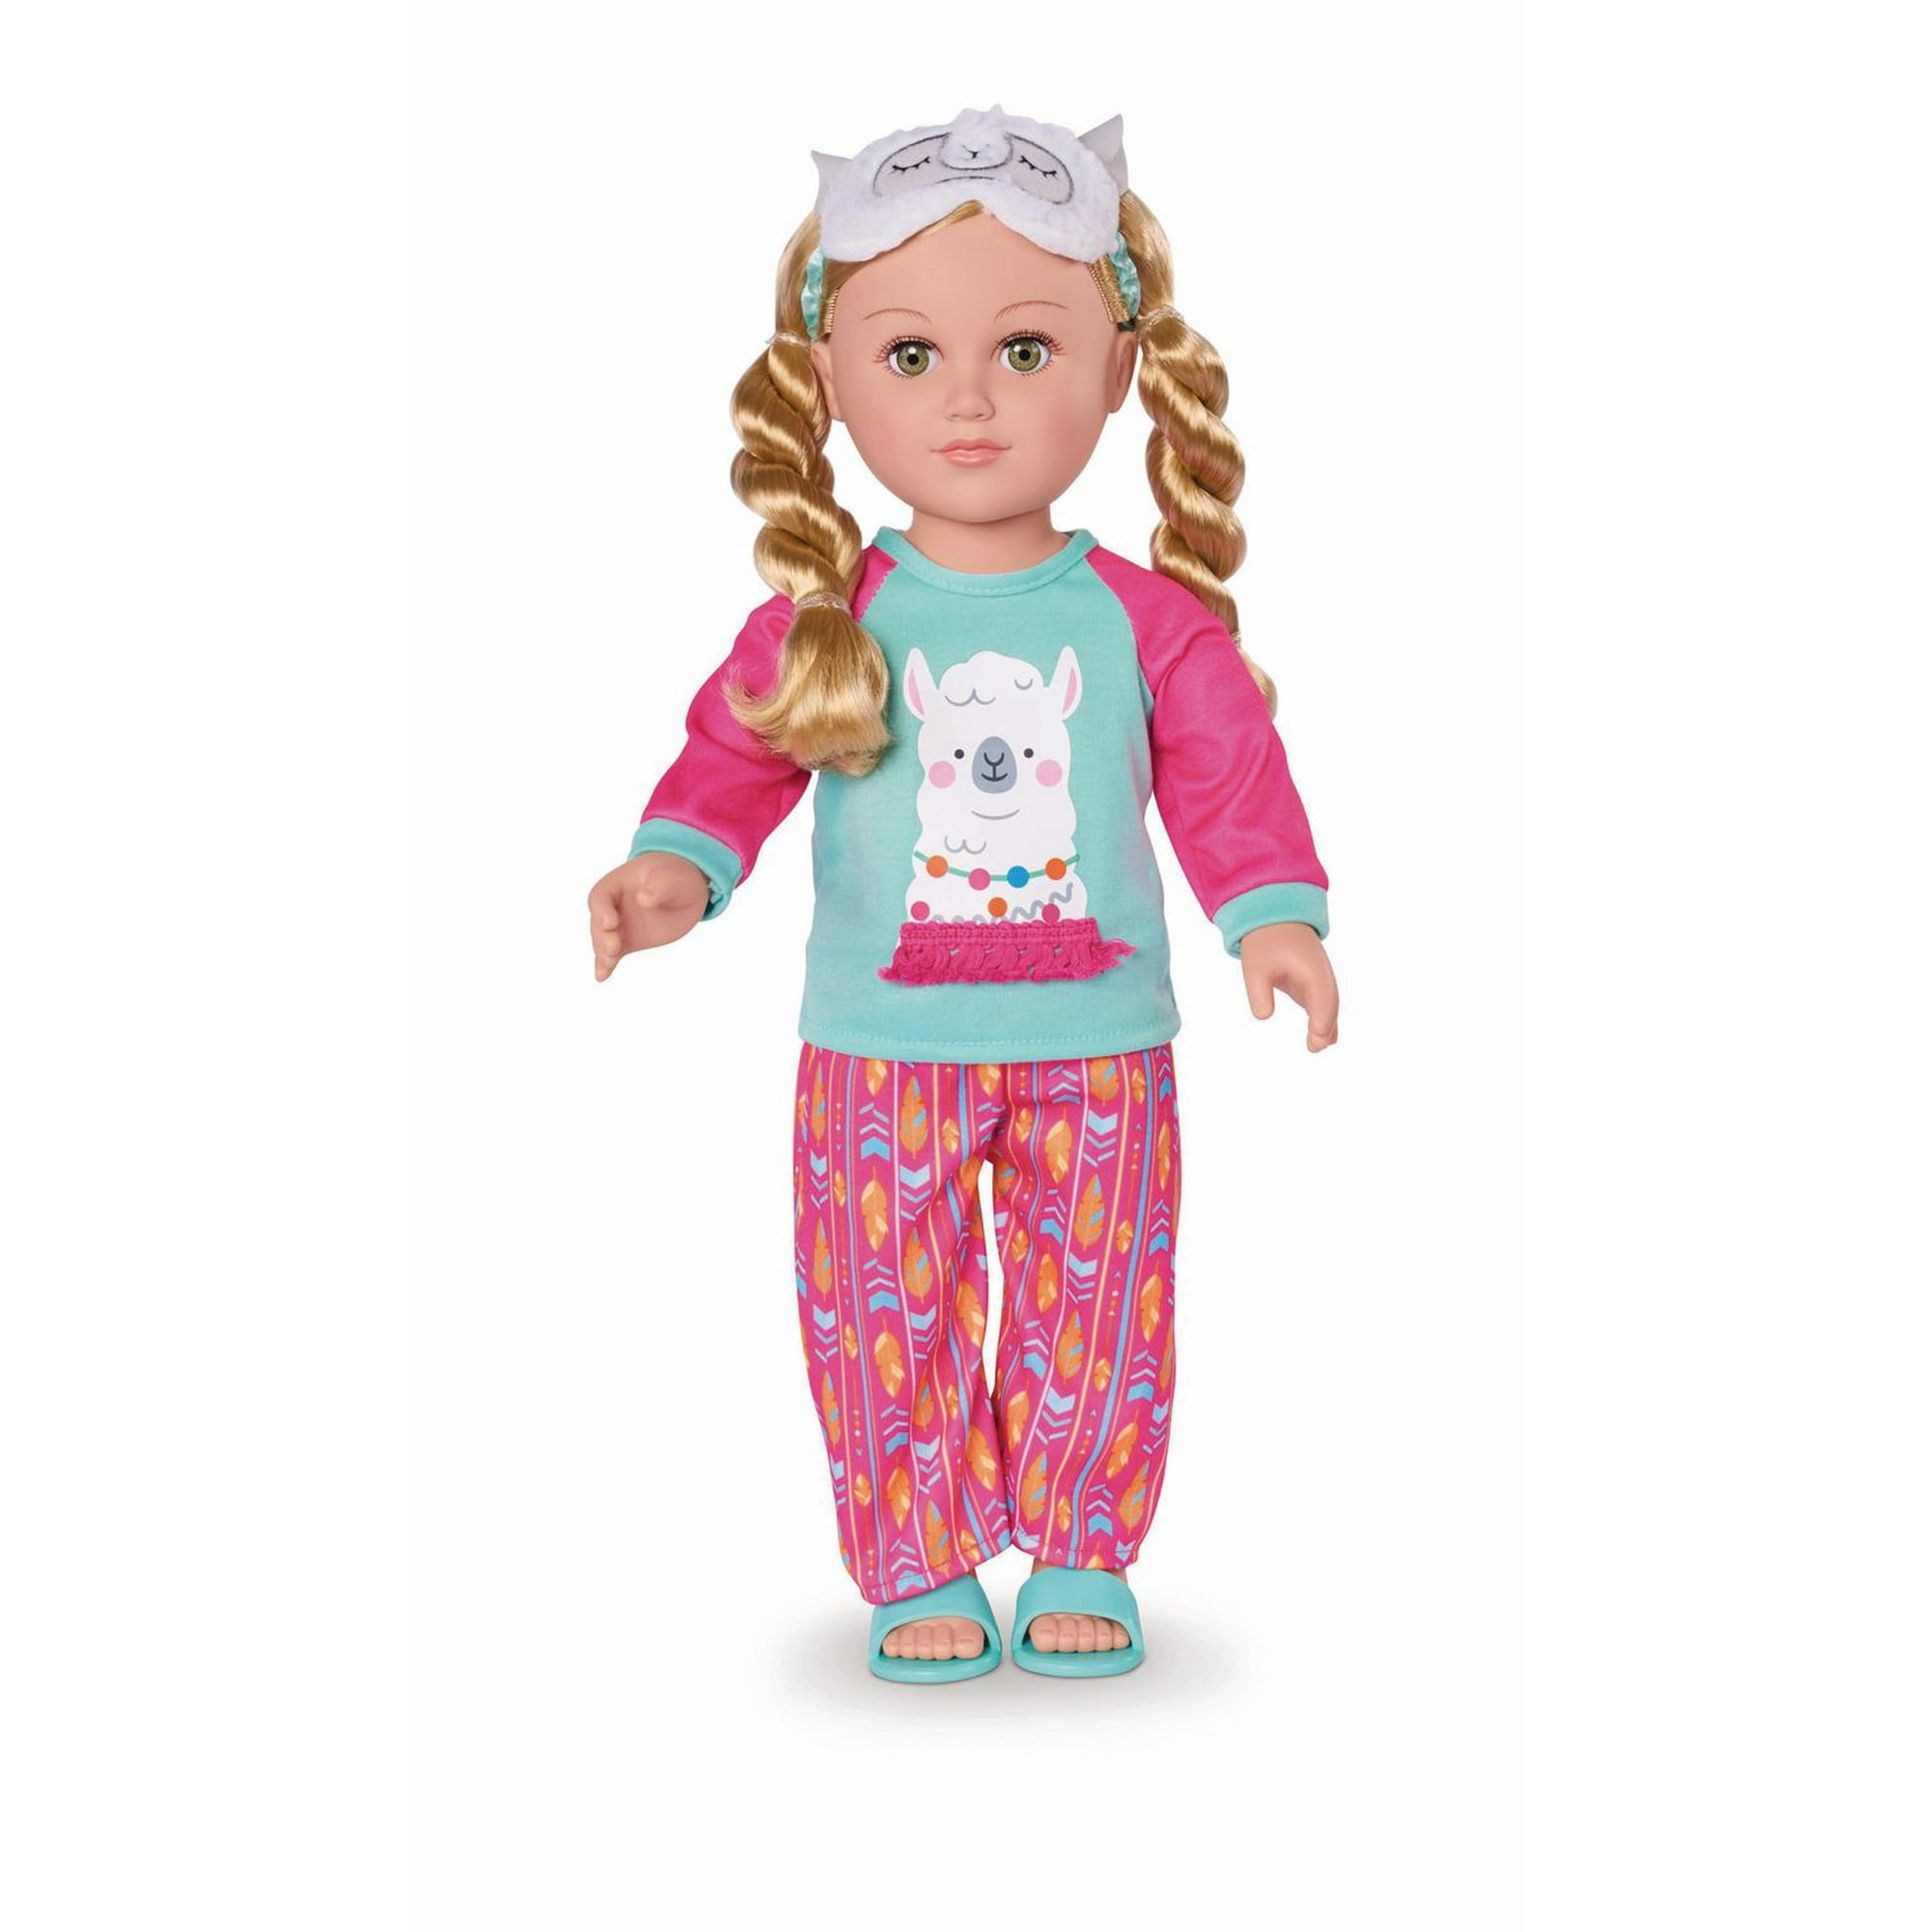 Little Abbee Slumber Party Pajamas Doll Clothes Pattern 18 inch American  Girl Dolls